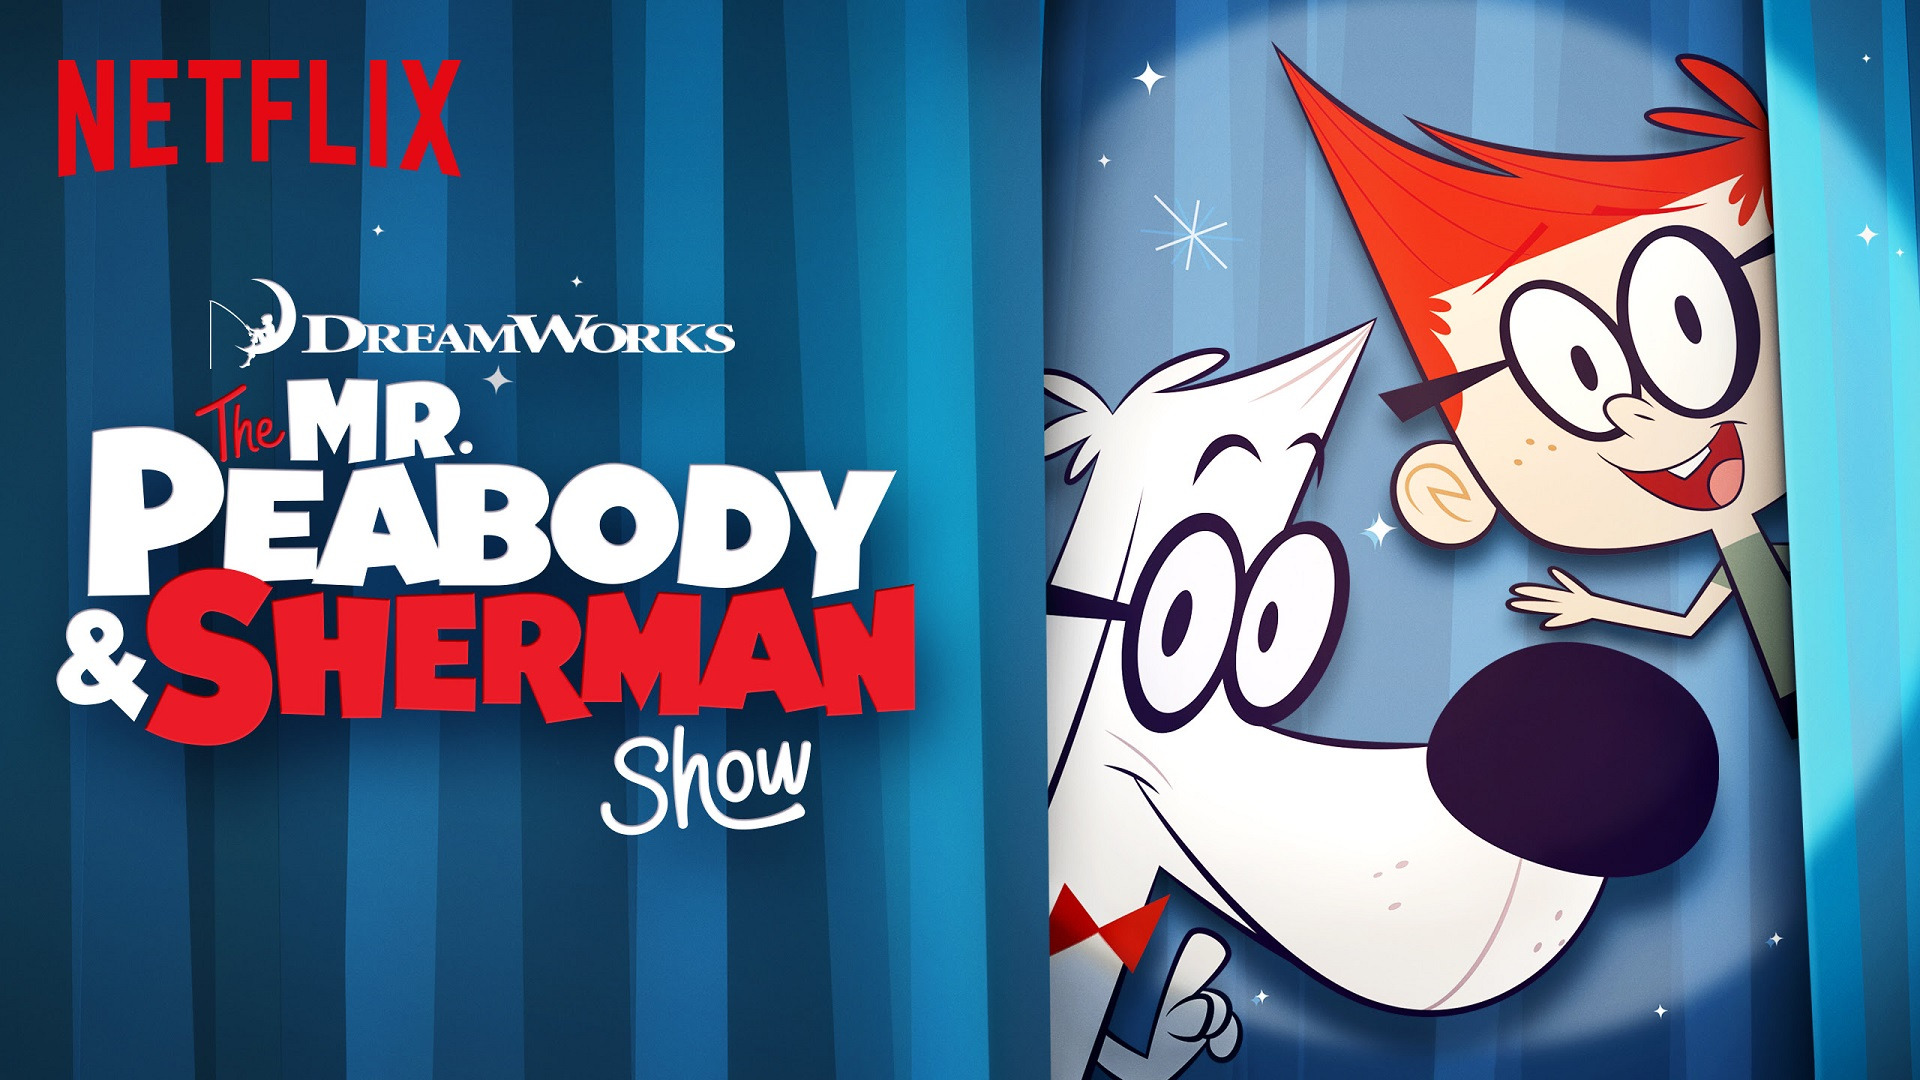 Show The Mr. Peabody and Sherman Show